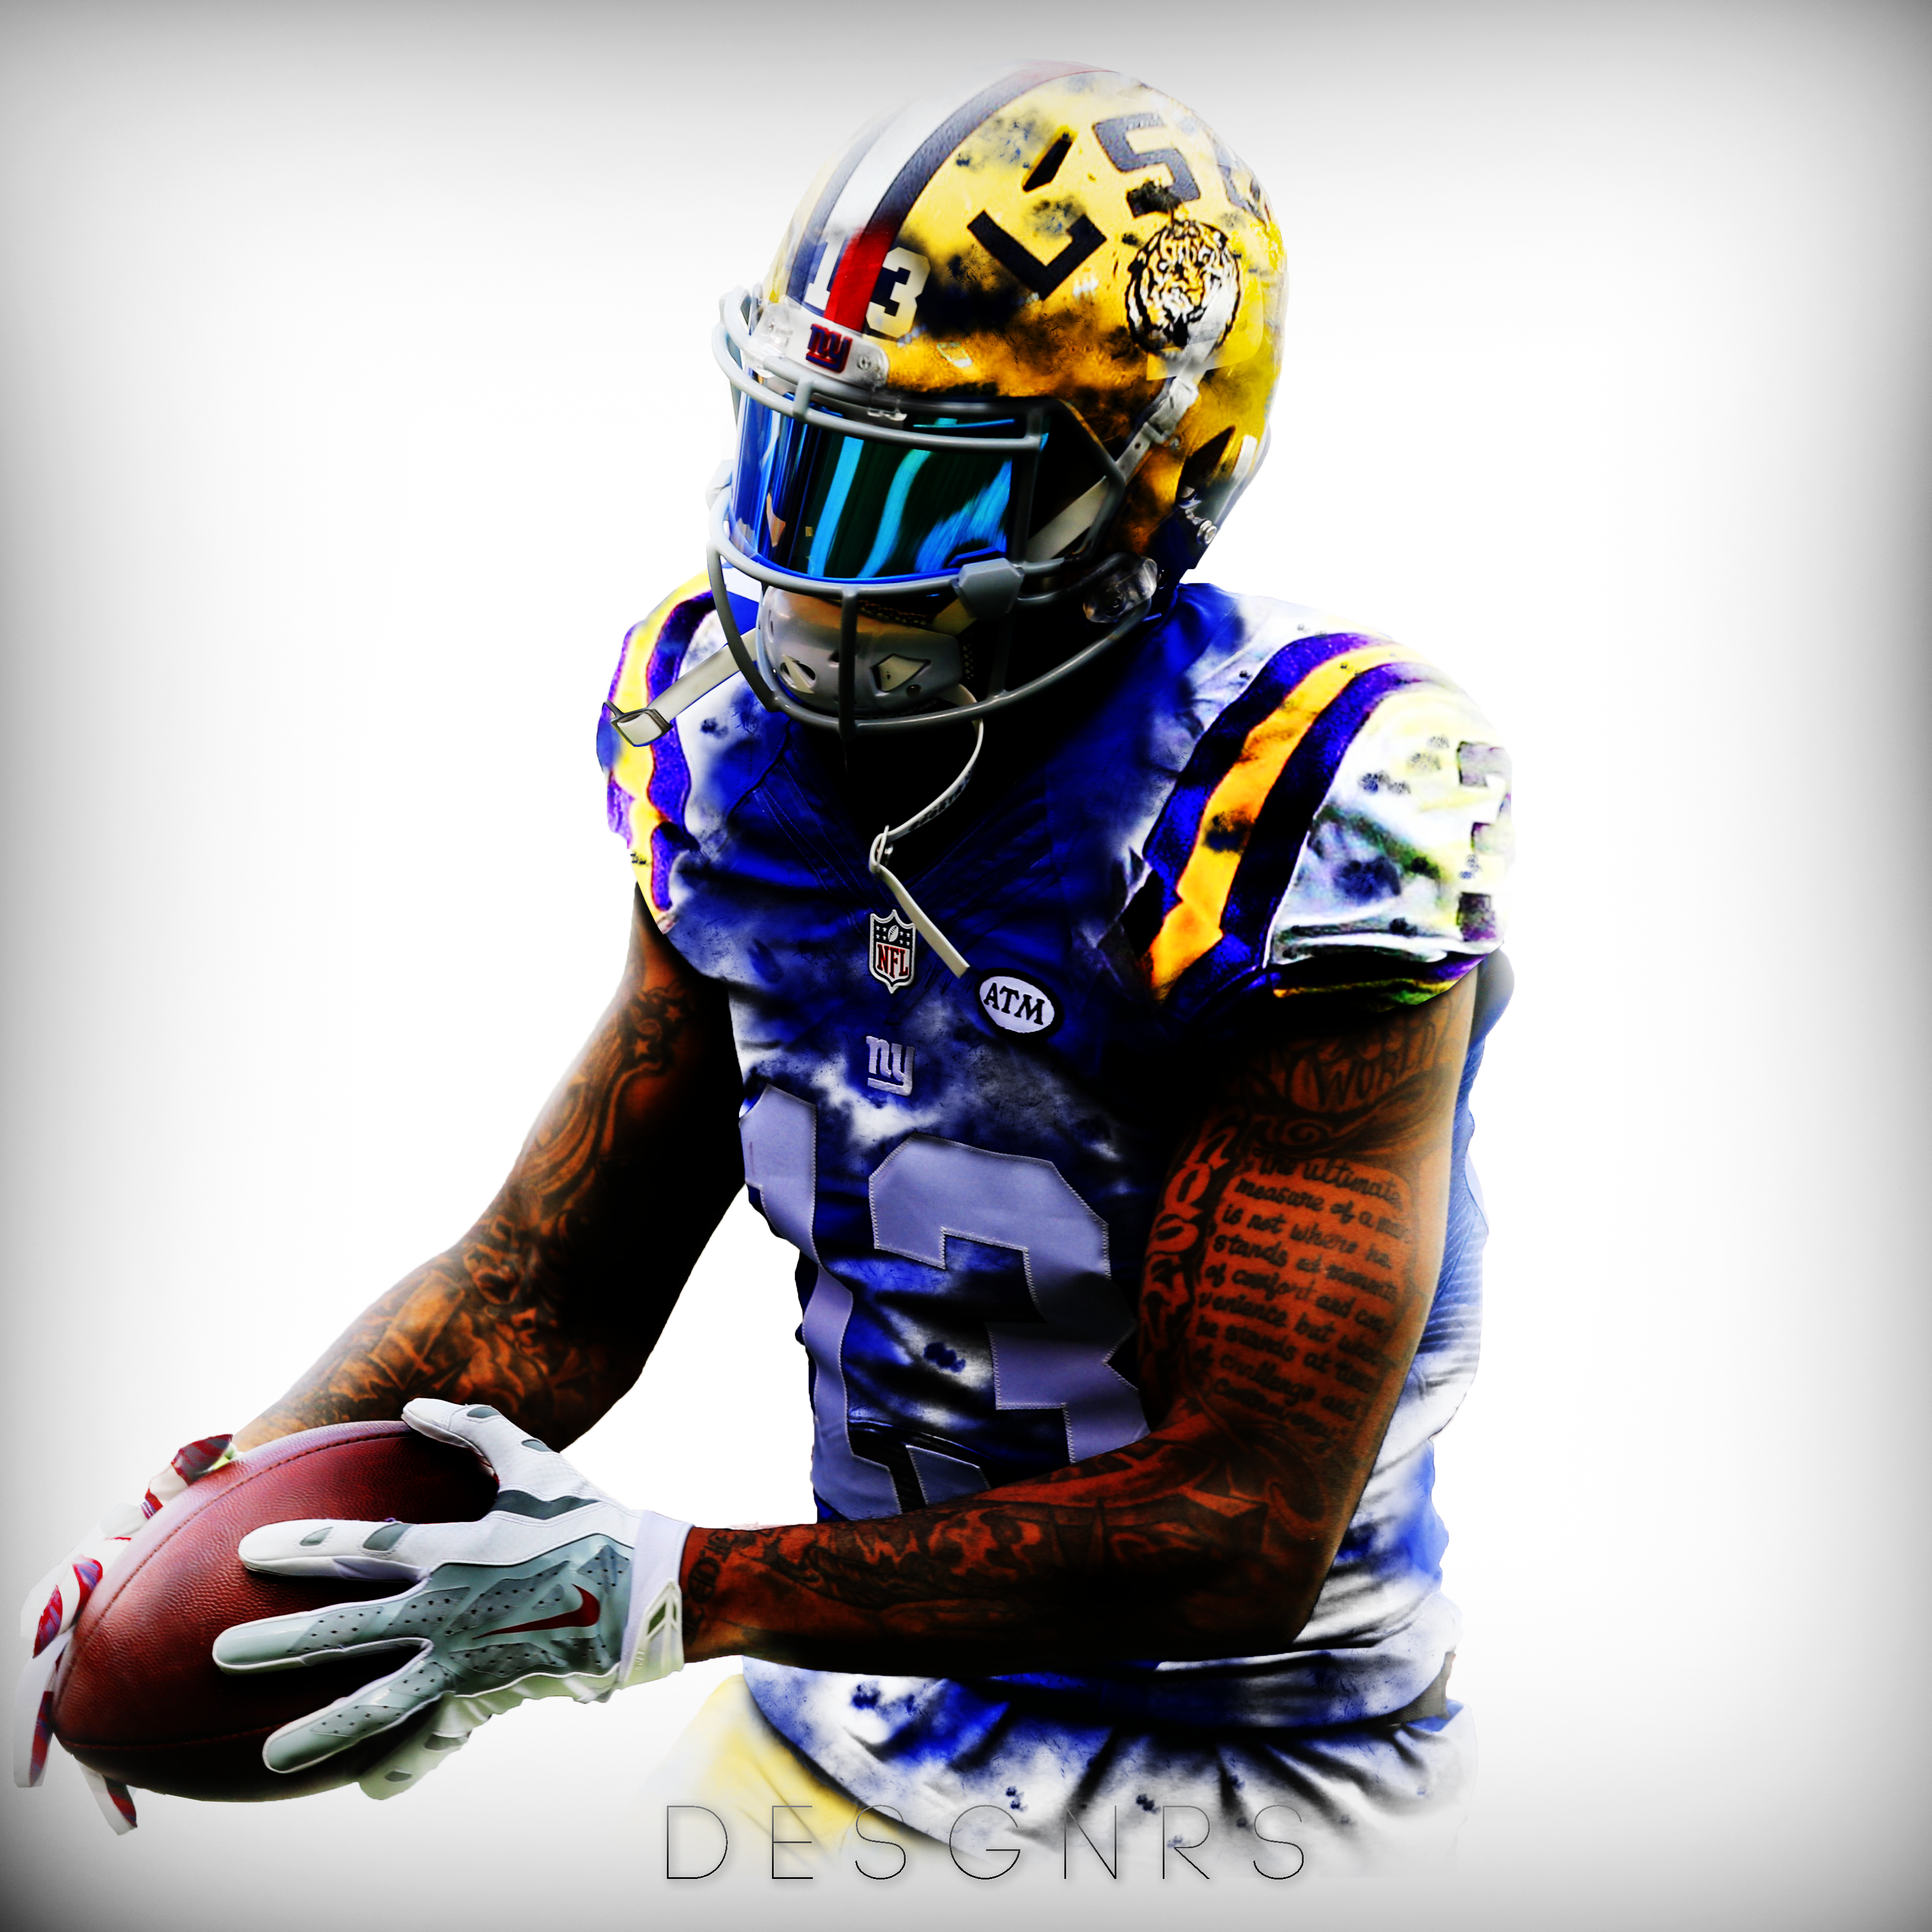 Odell Wallpaper Free Odell Background